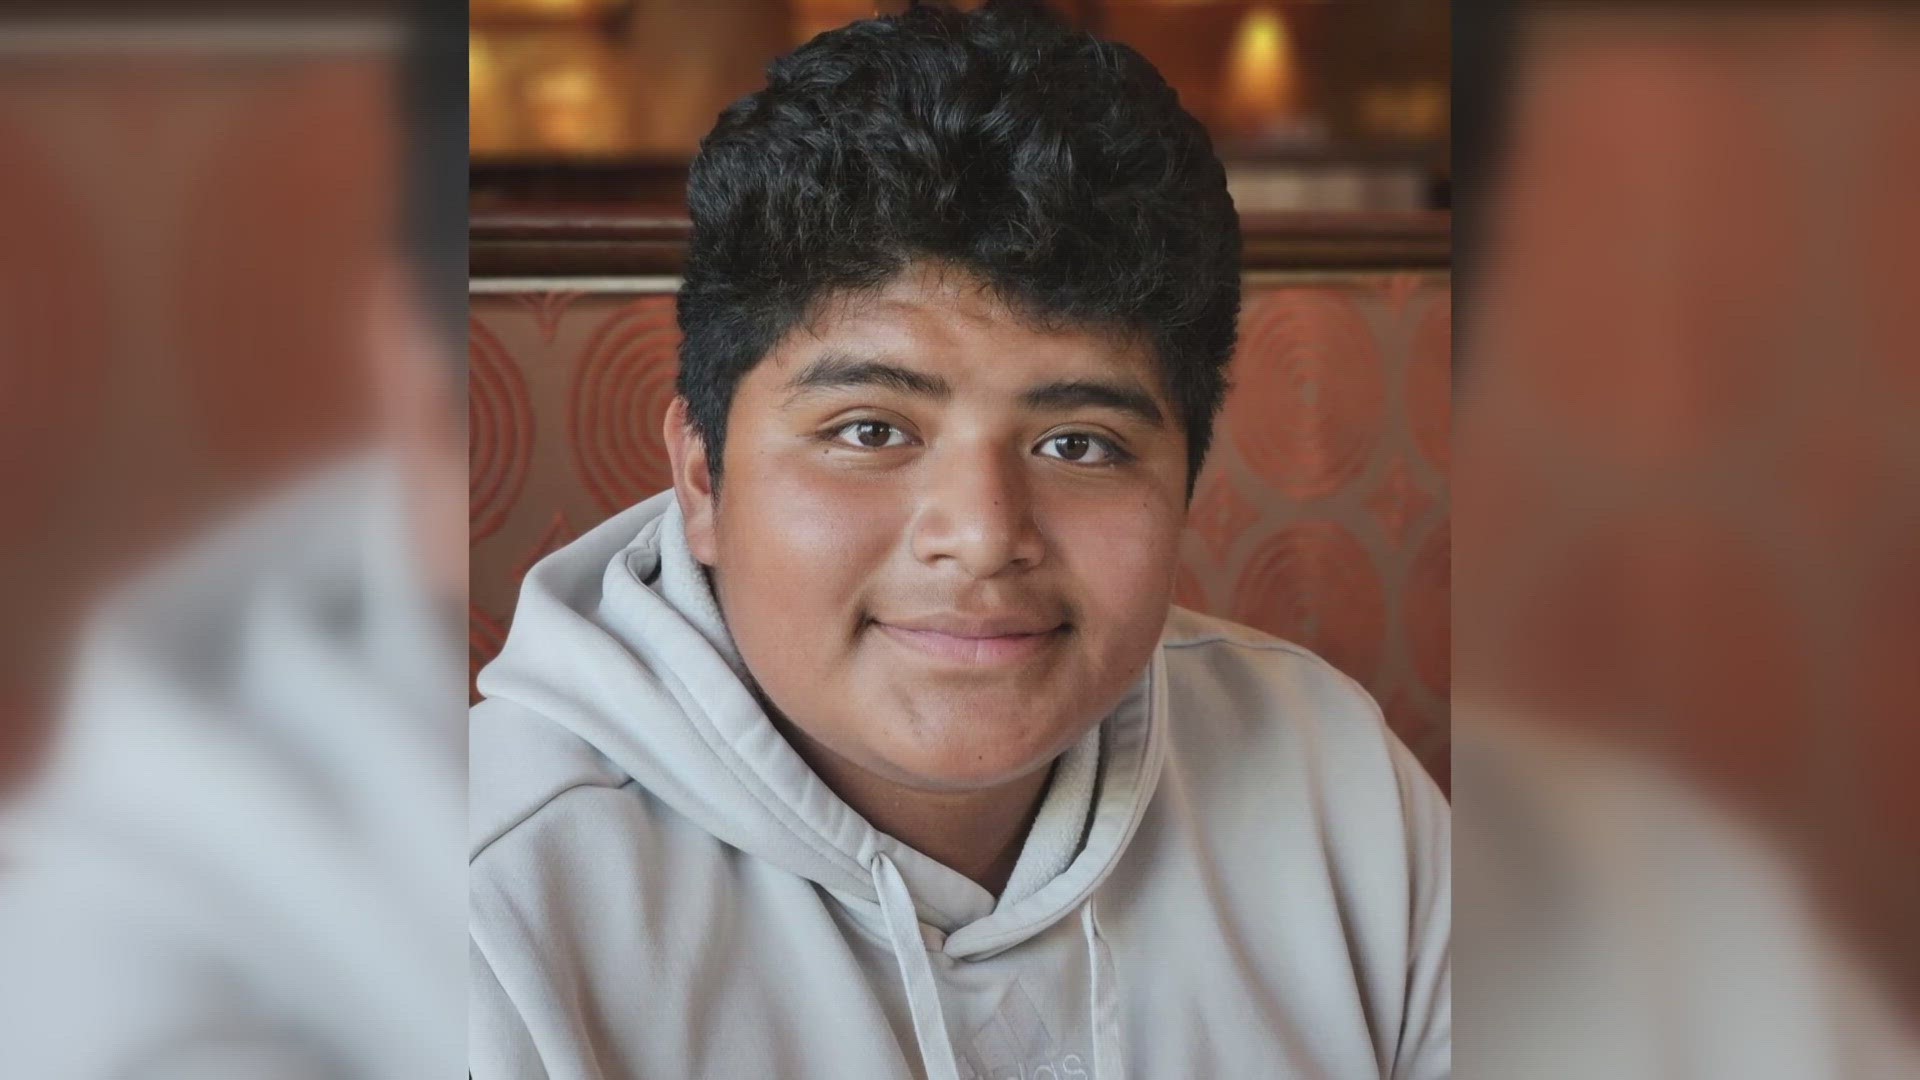 The teen was last seen leaving his school Tuesday afternoon, police said. His SUV was later found without him in St. Louis.